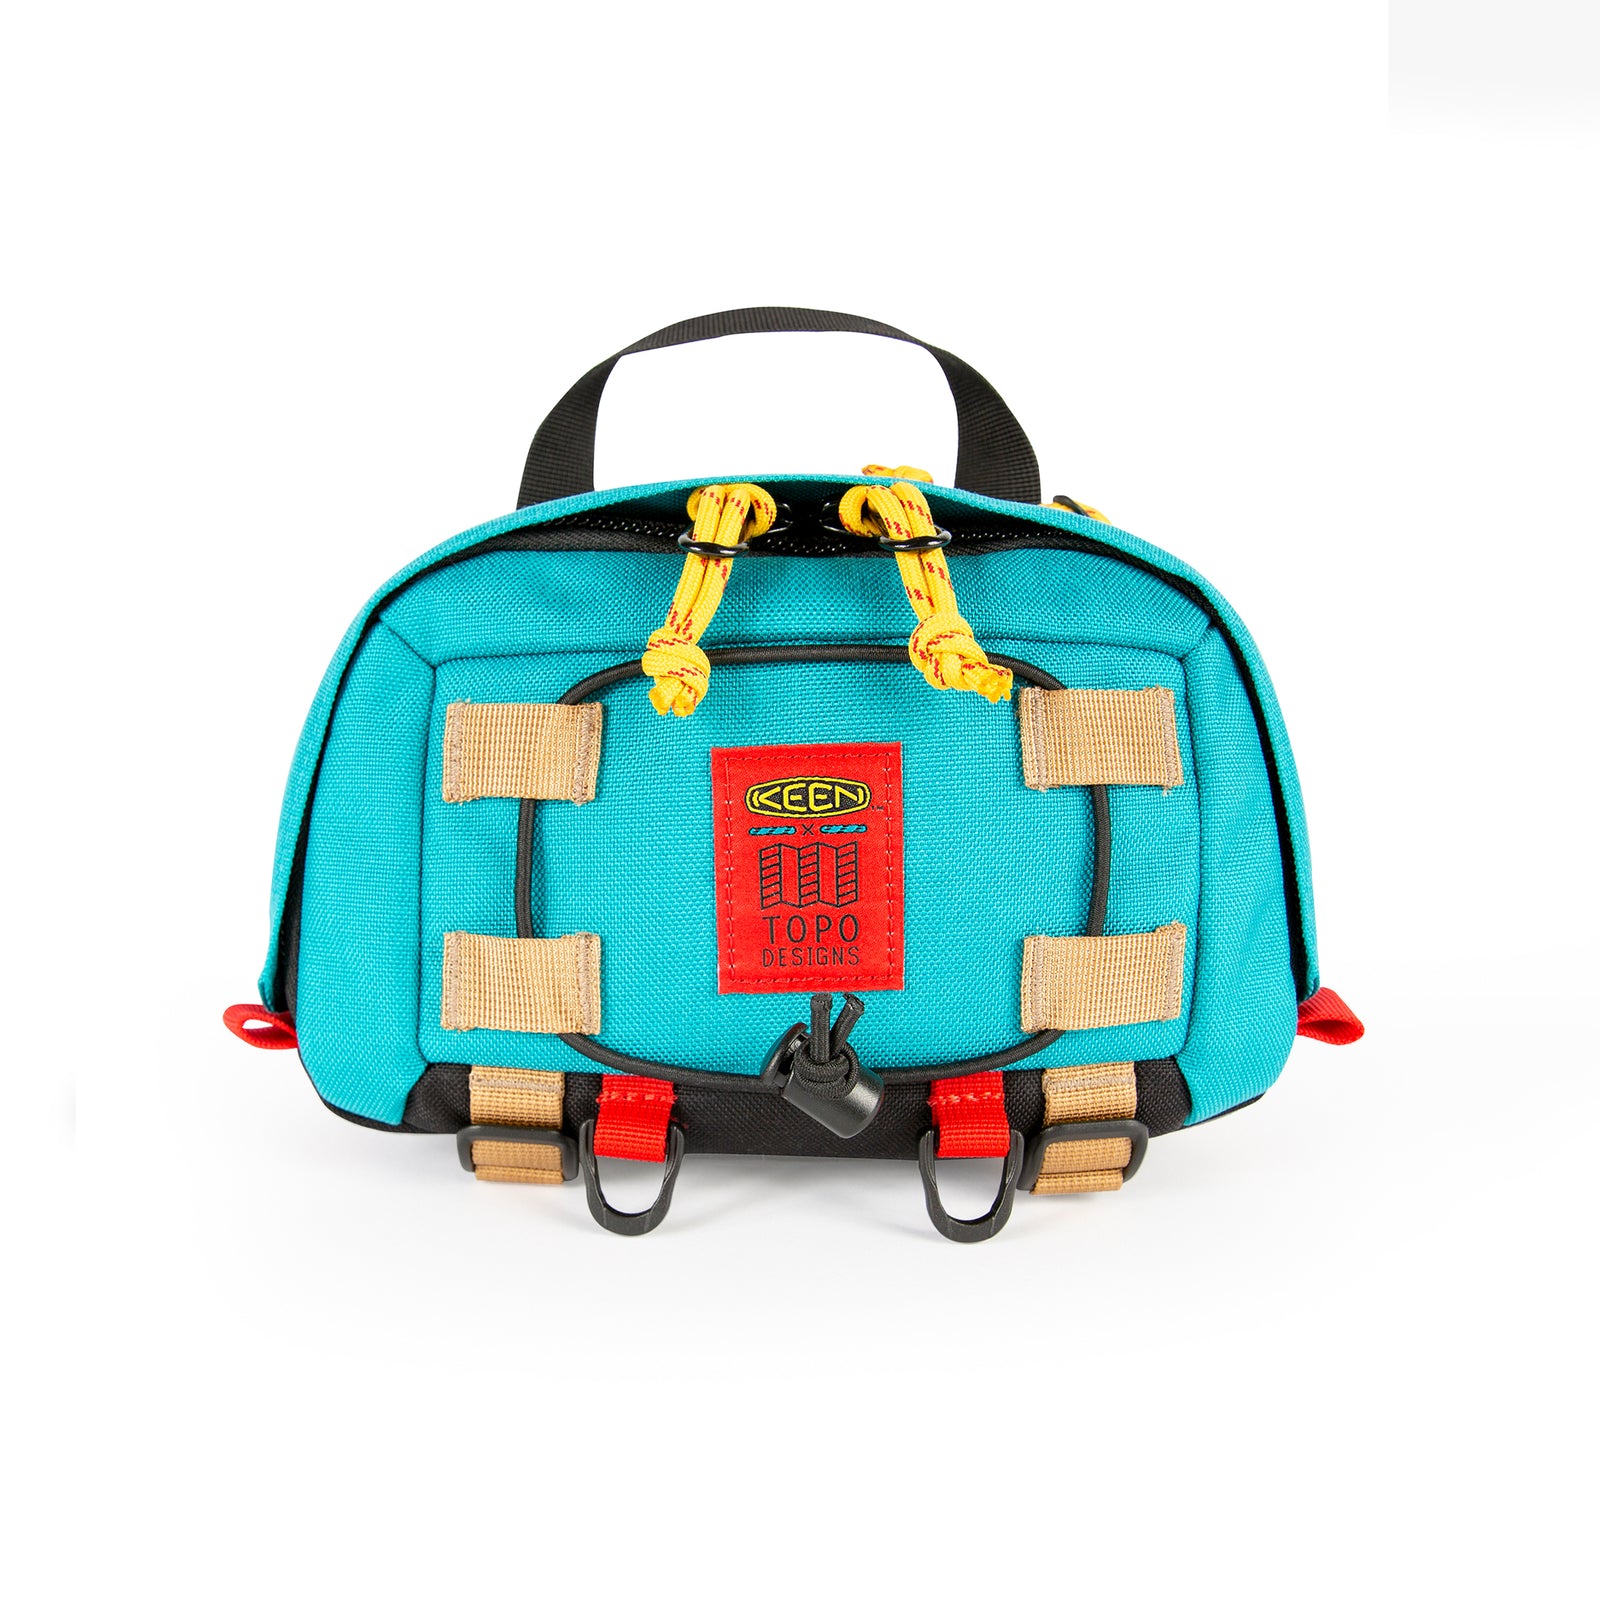 Topo Designs x Keen River Subalpine Hip Pack fanny bum bag in Turquoise blue.